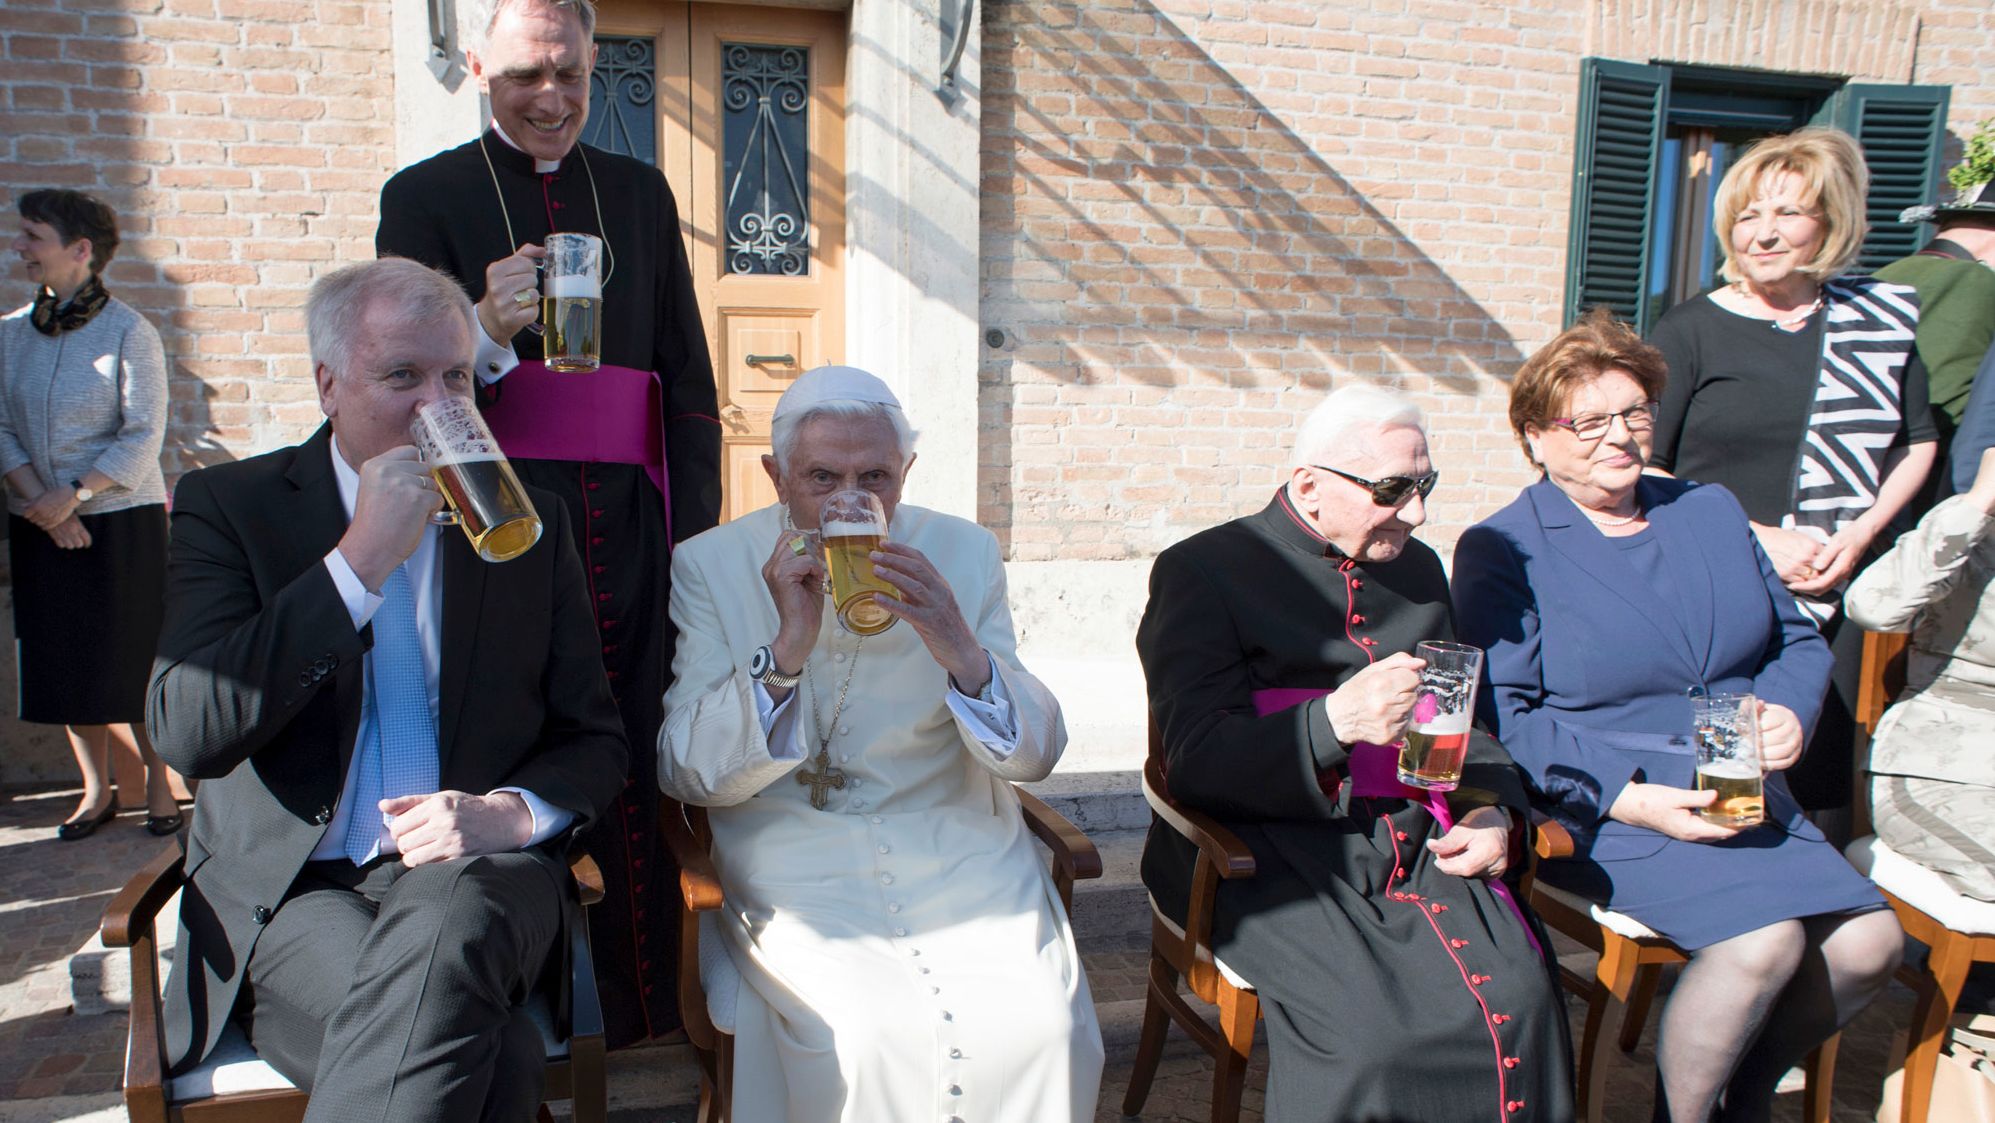 Benedict, seated second from left, has a glass of beer on his 90th birthday in 2017.